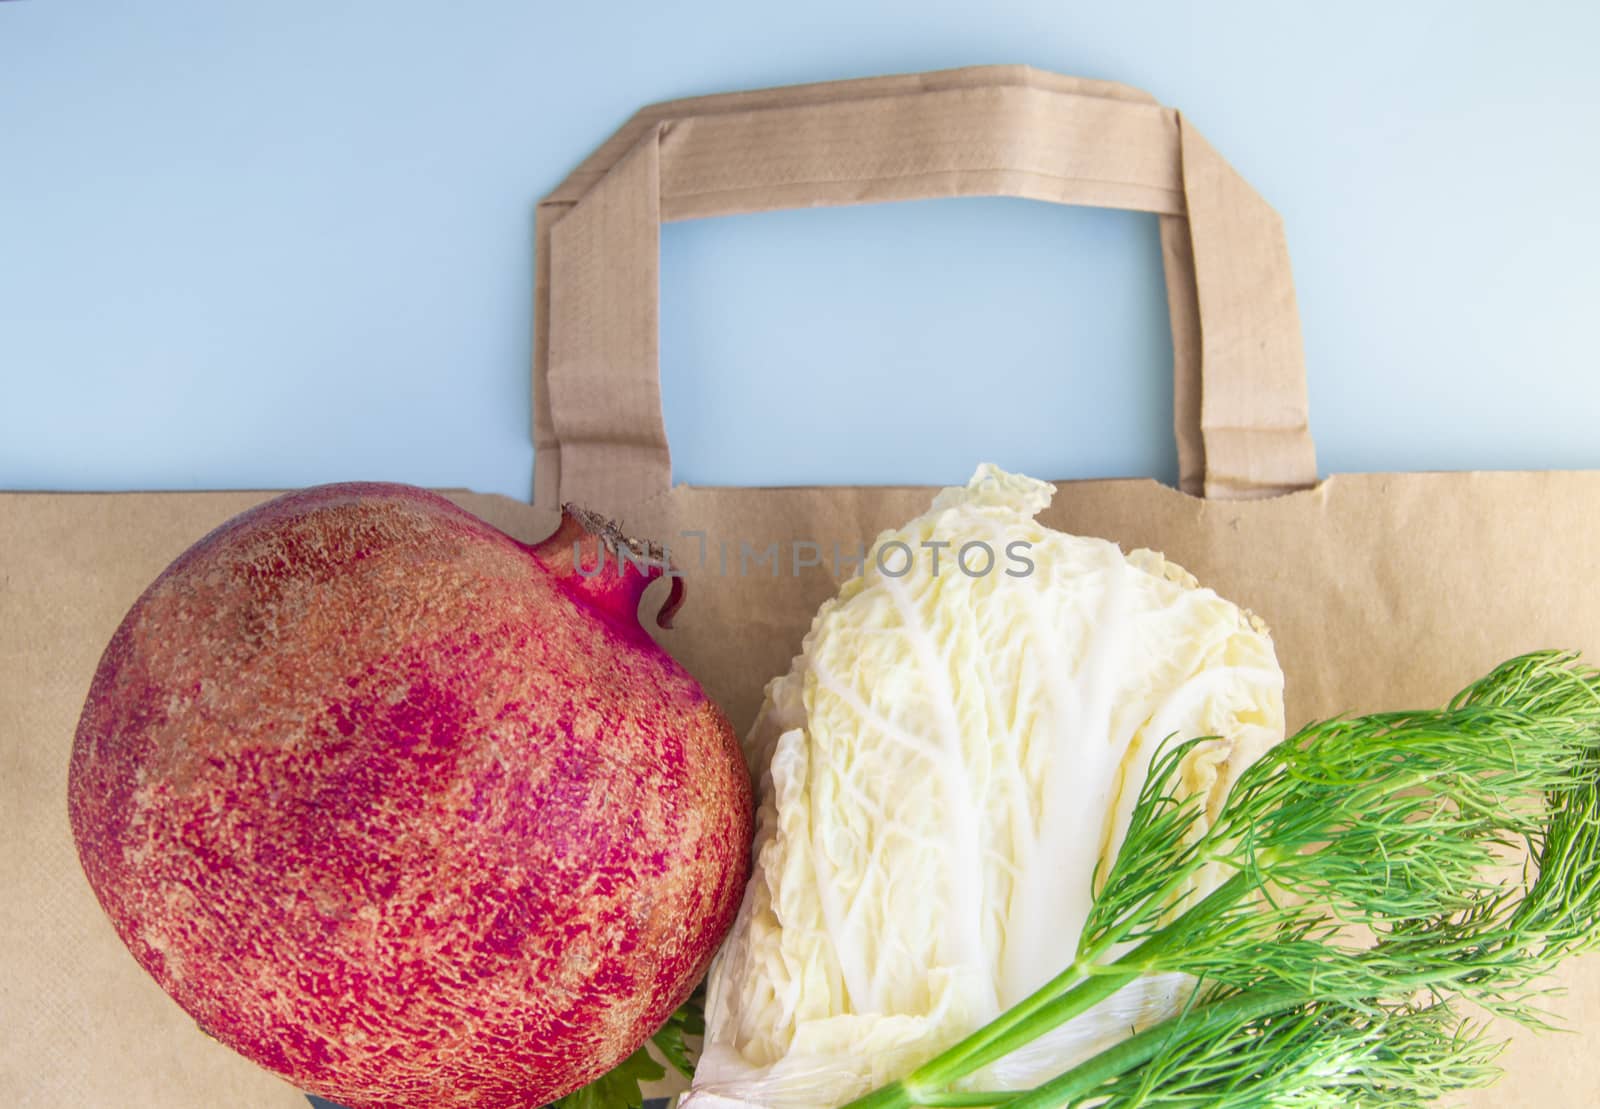 Flat lay, Healthy fruits and vegetables for proper nutrition on top of a paper bag, the concept of abandoning plastic bags and shopping at a diet by claire_lucia